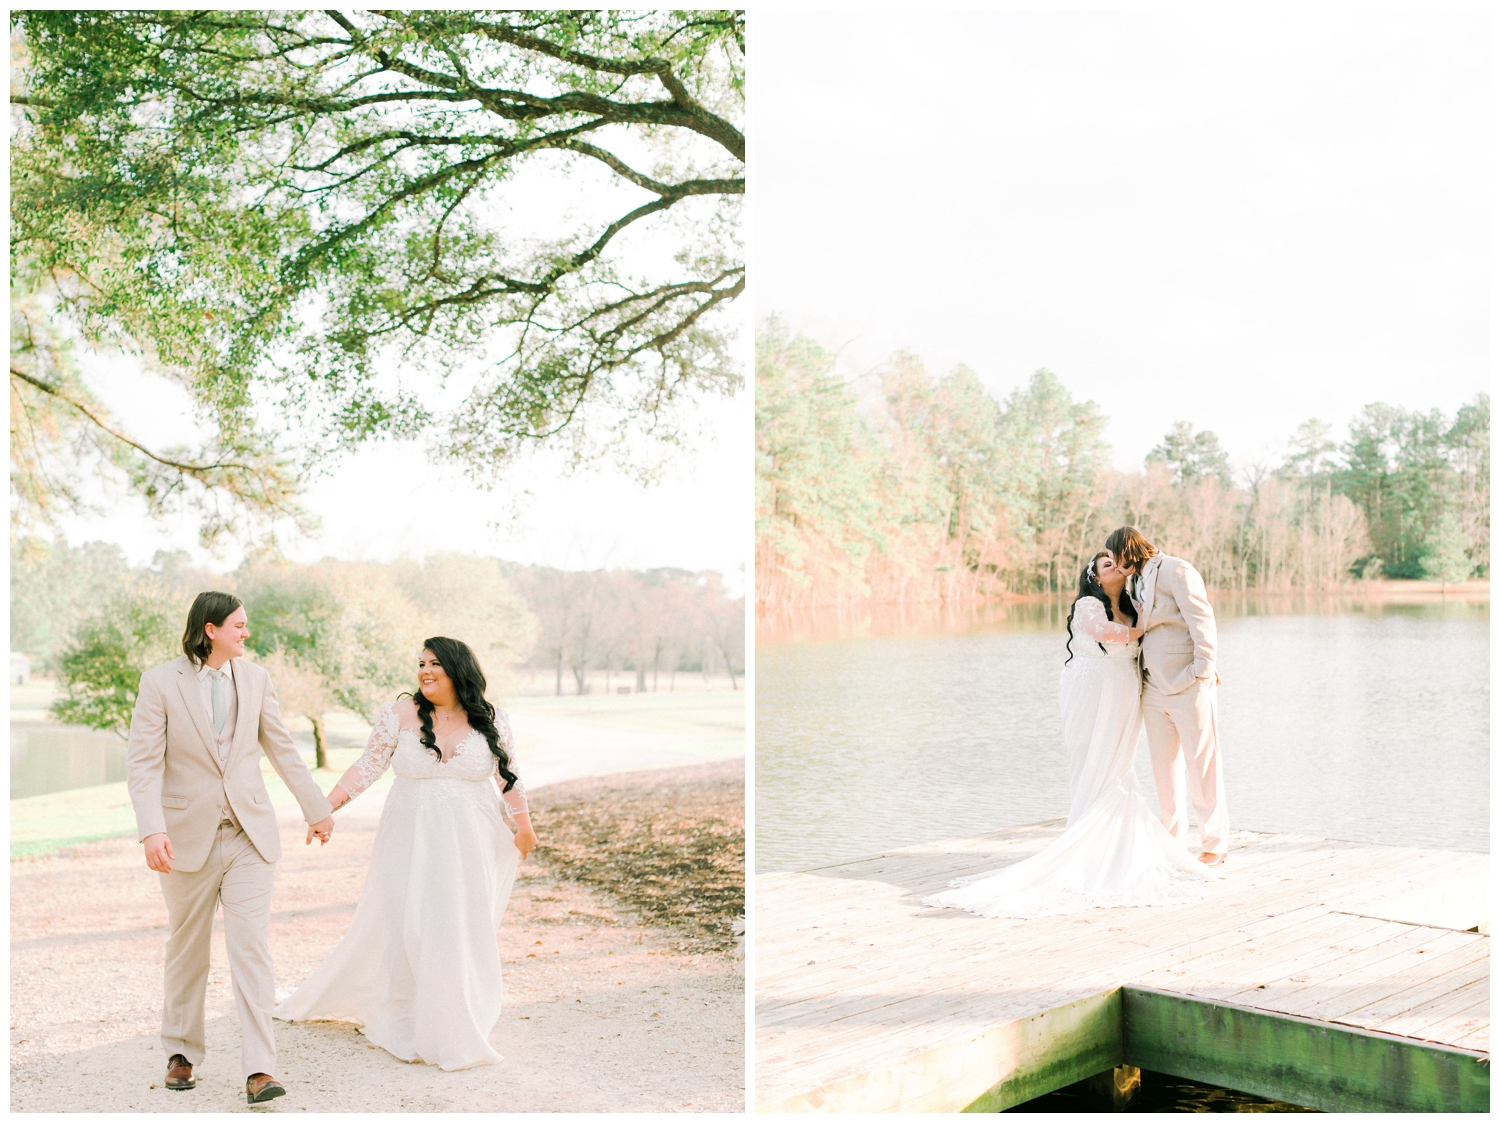 married bride and groom portraits by a pond